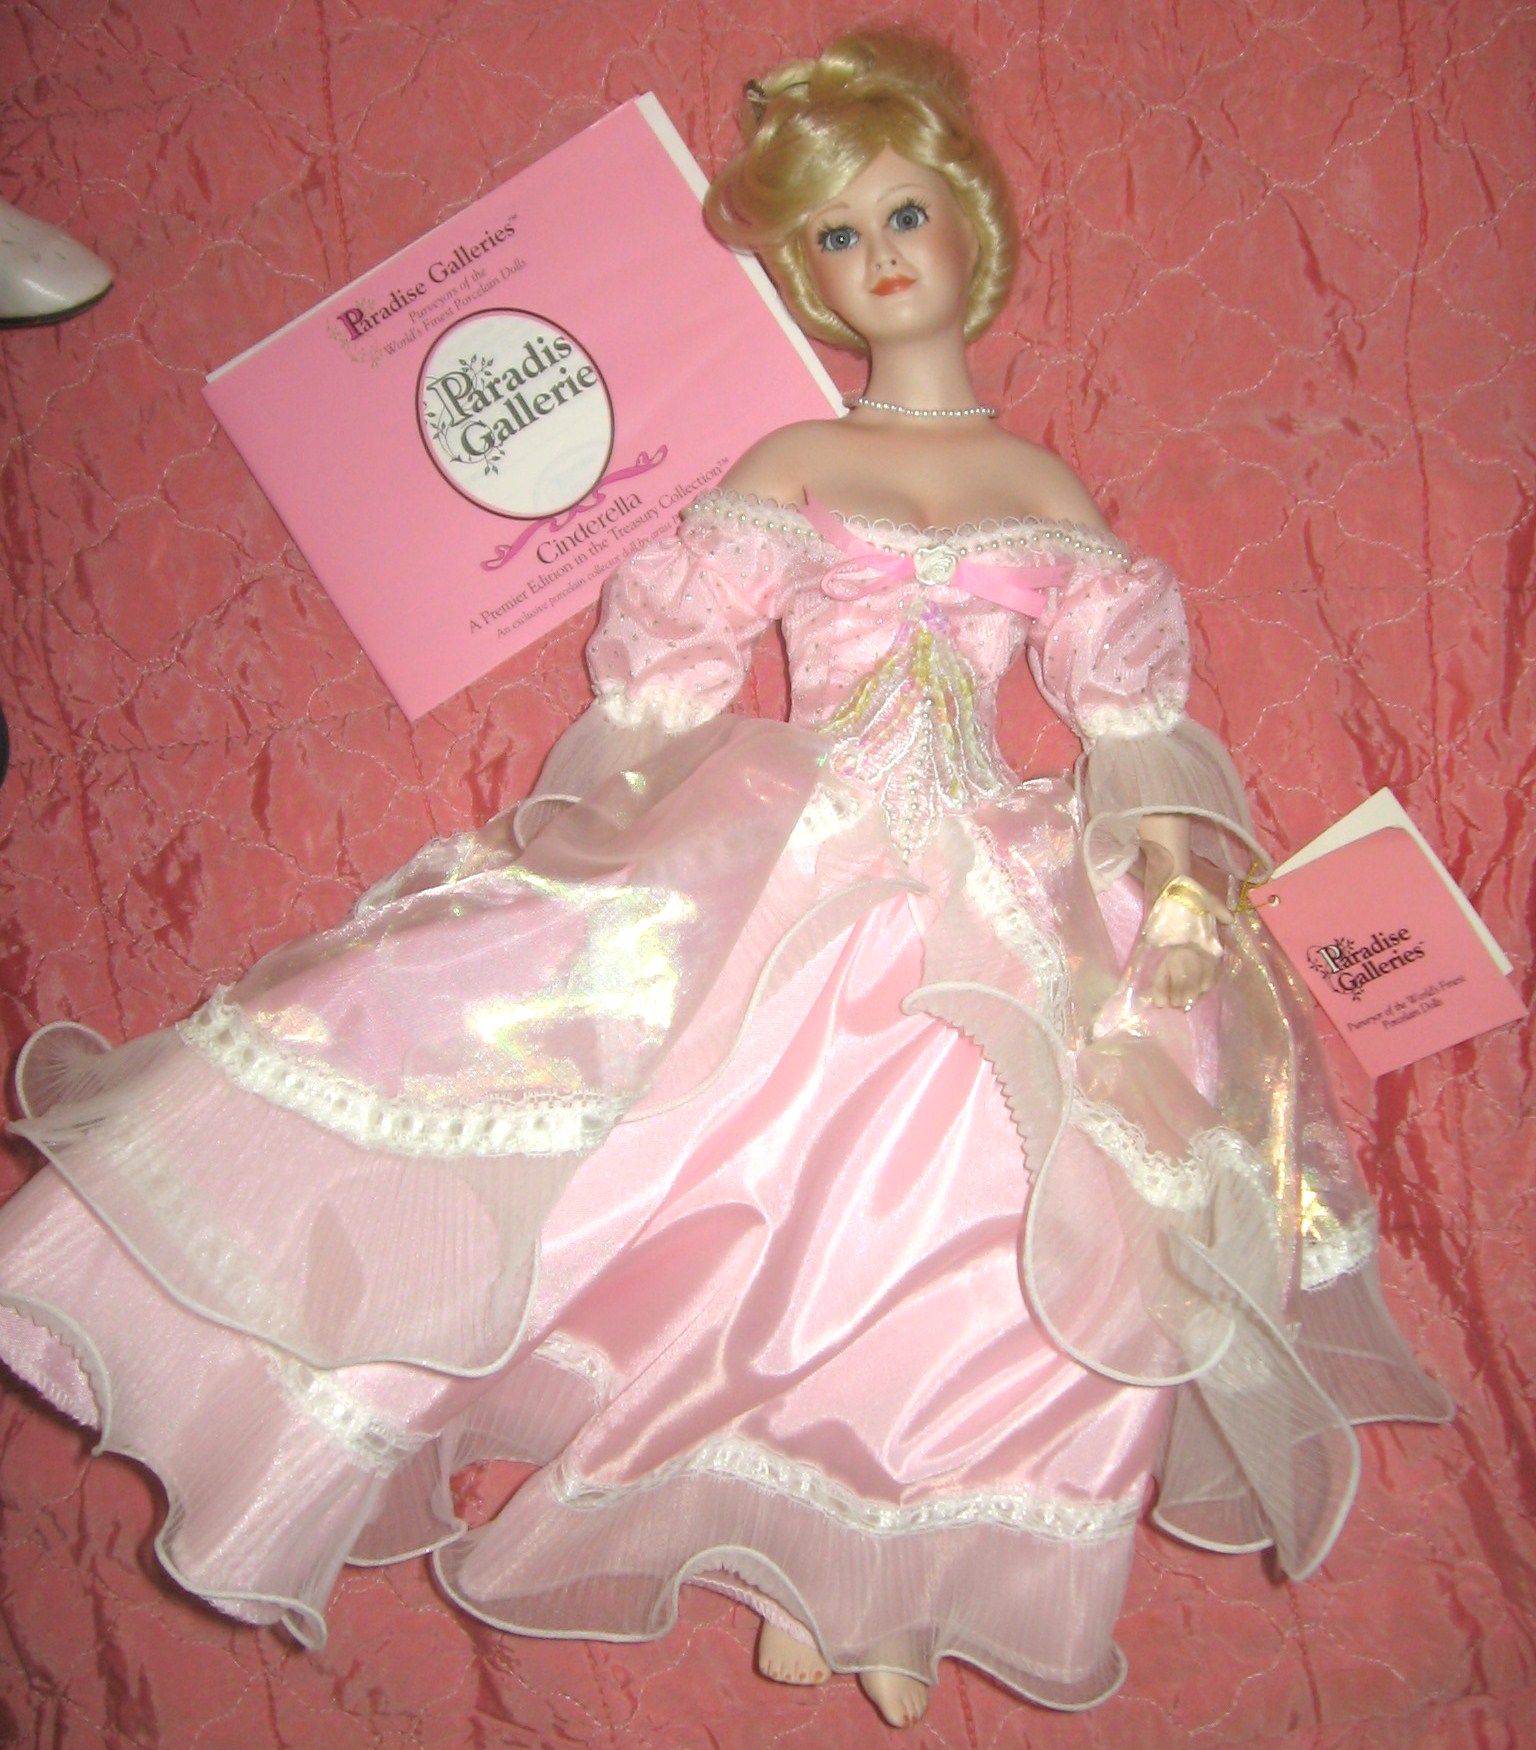 a toy wearing a pink dress holding a book